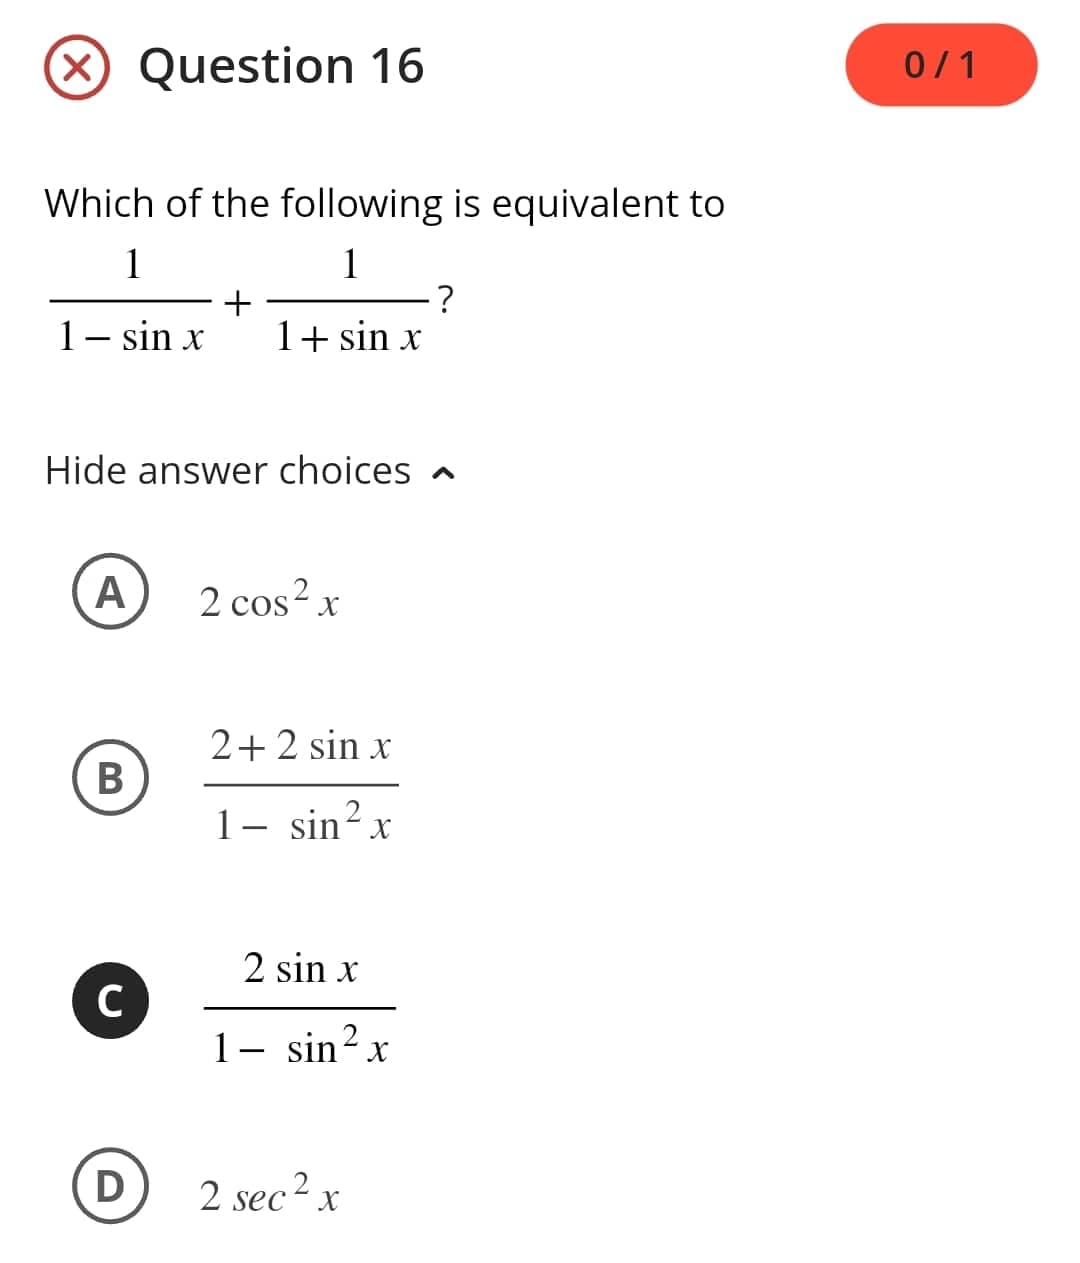 Which of the following is equivalent to
1
1
1 - sin x
A
Question 16
B
Hide answer choices
C
D
+
1+ sin x
2 cos²x
2+2 sin x
1- sin² x
2 sin x
1- sin²x
2 sec ² x
?
0/1